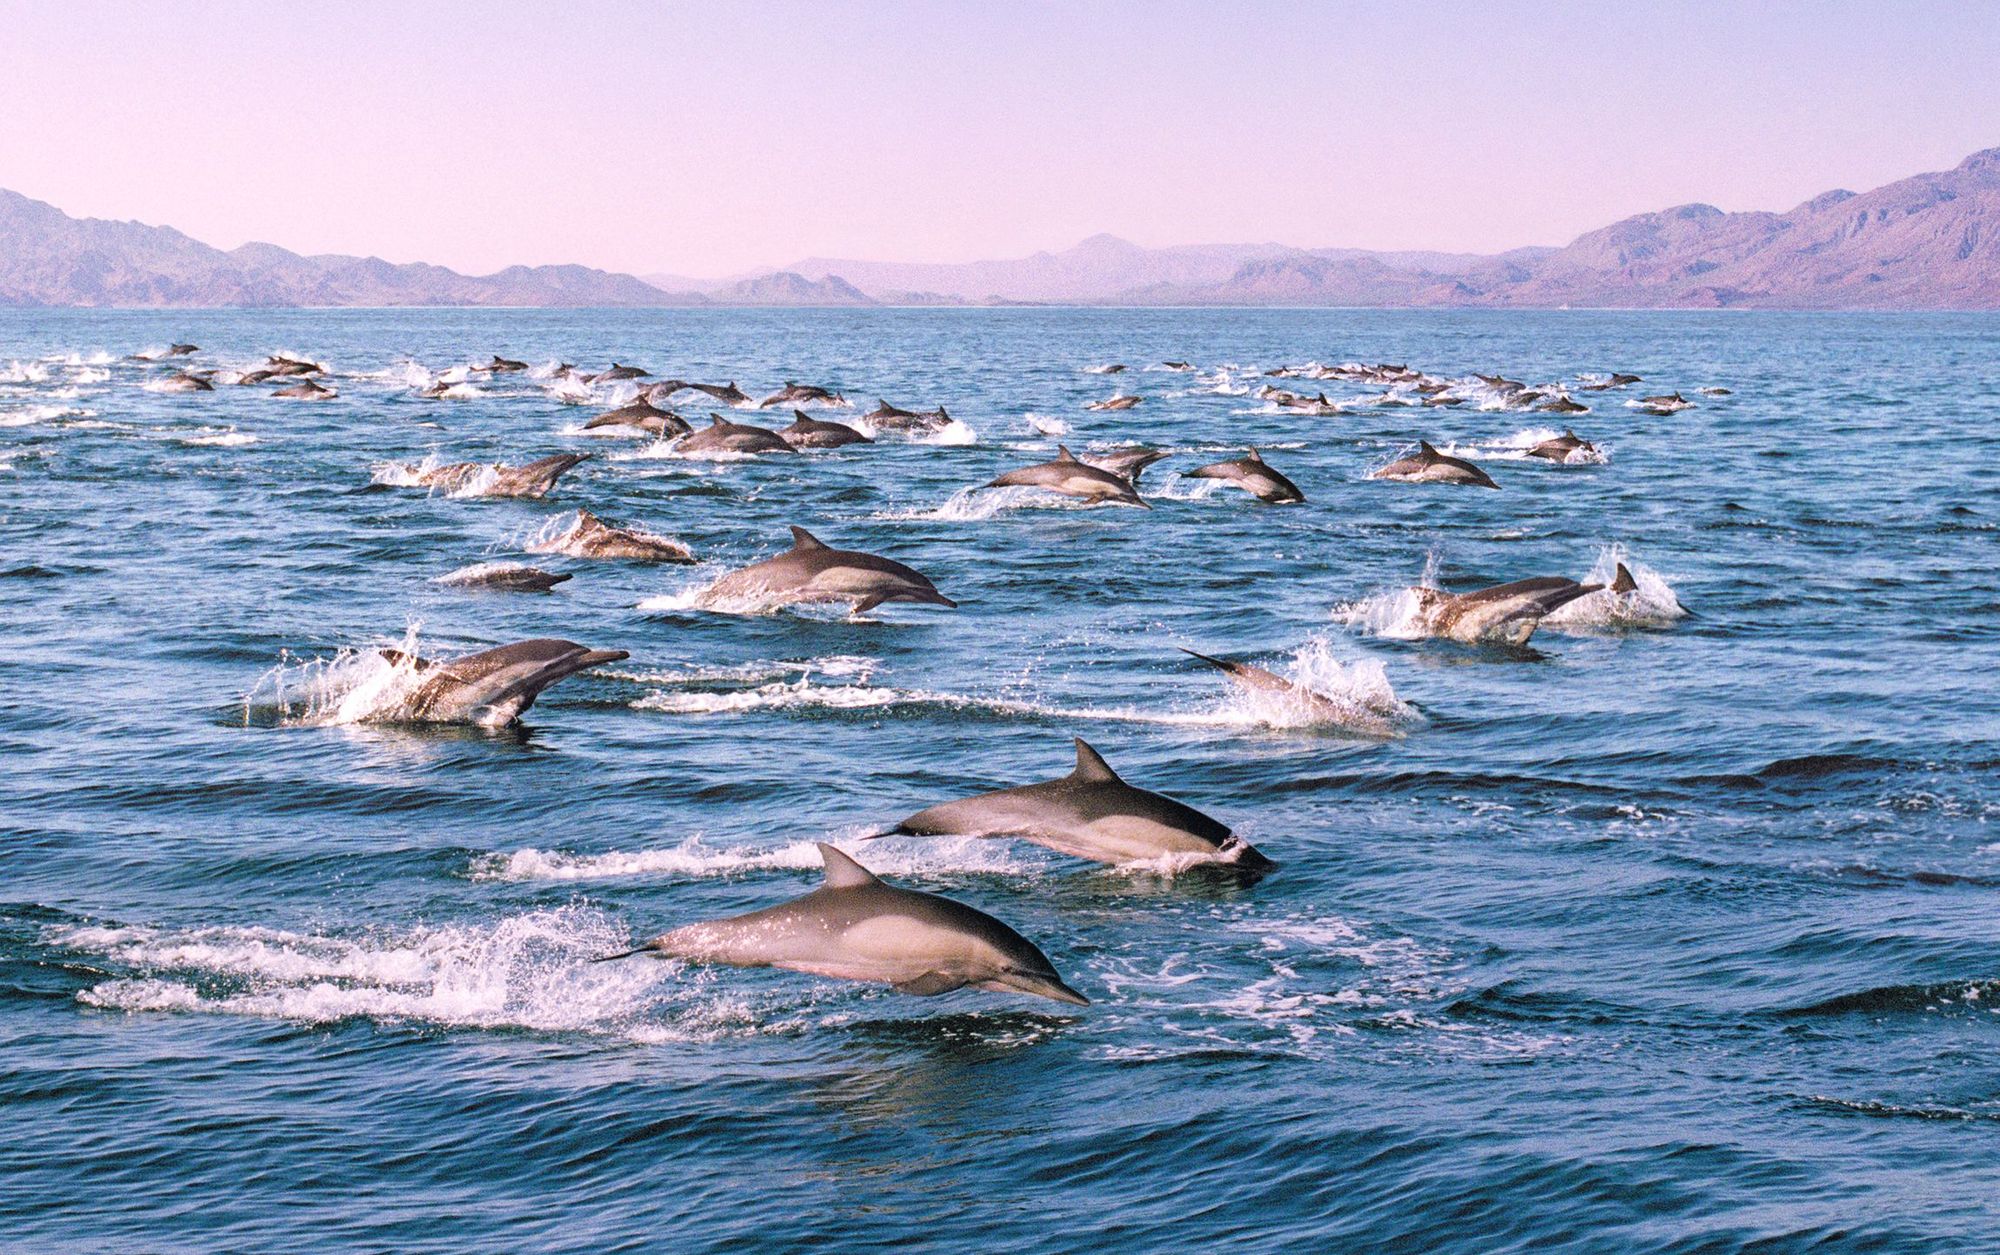 A pod of dolphins jumping through the waters off the coast of the Baja California peninsula. Photo: Getty